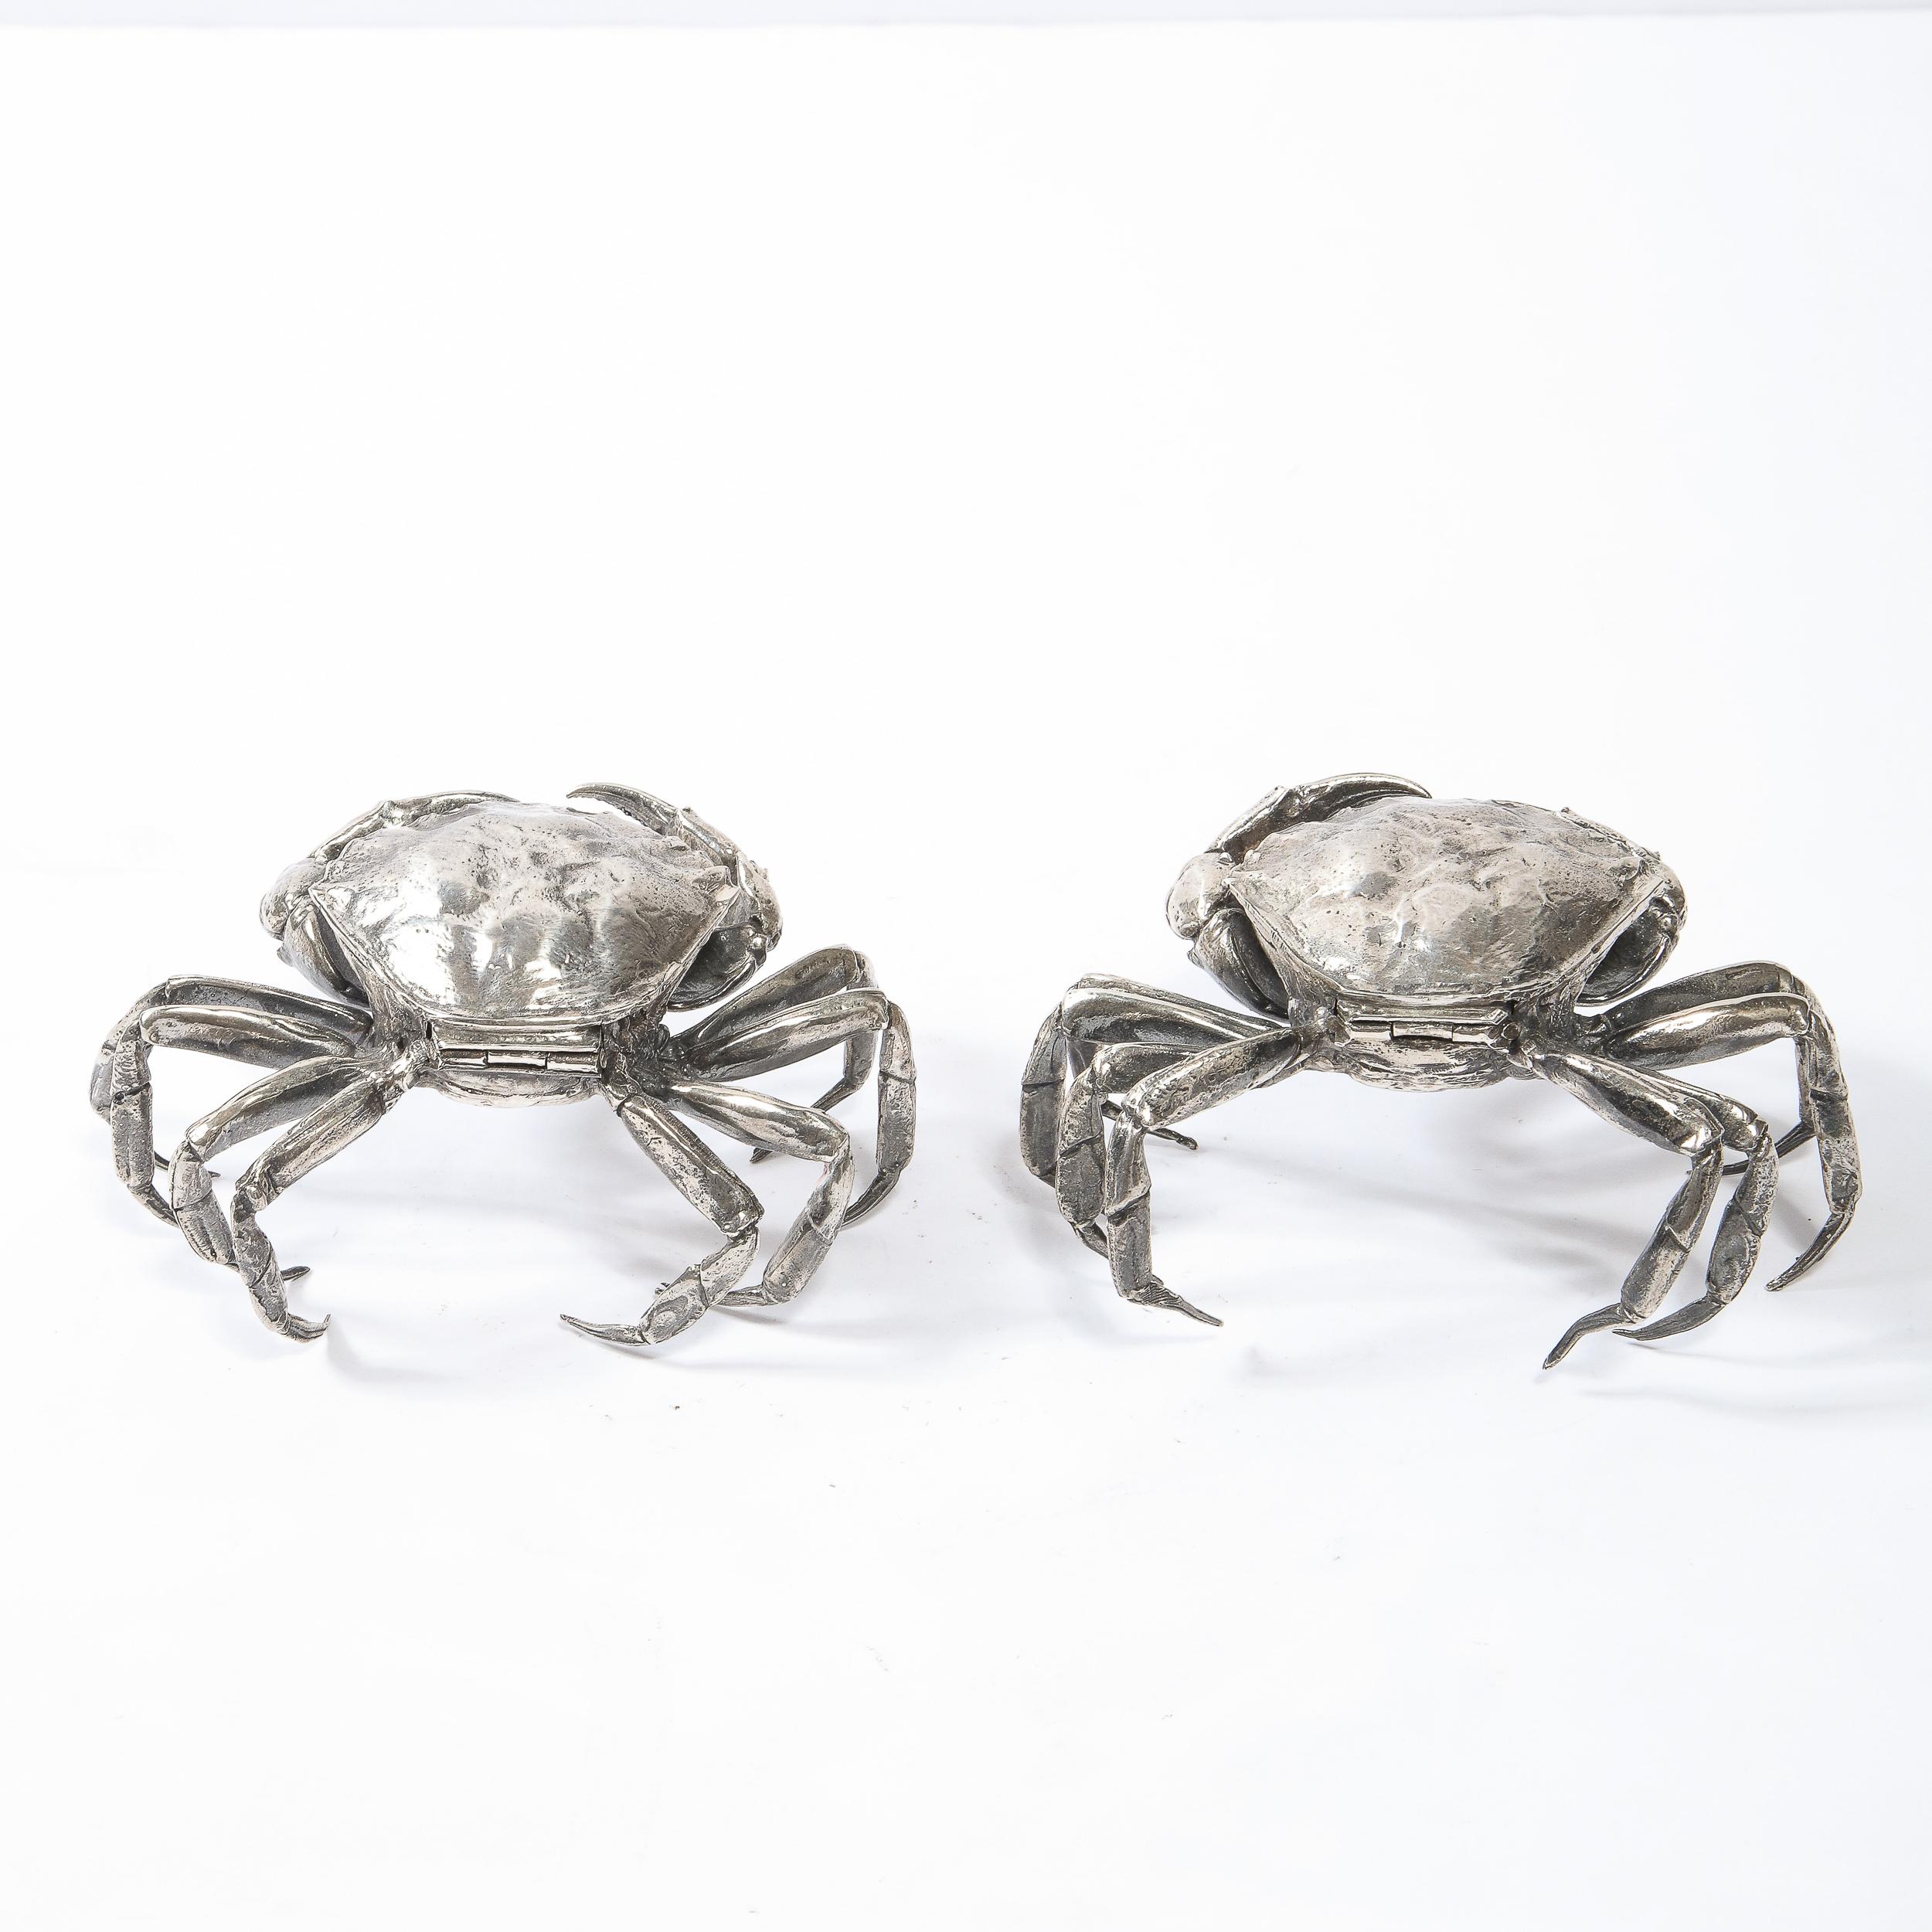 Pair of Modernist Sterling Silver Hand Wrought Stylized Crab Salt Cellars 1